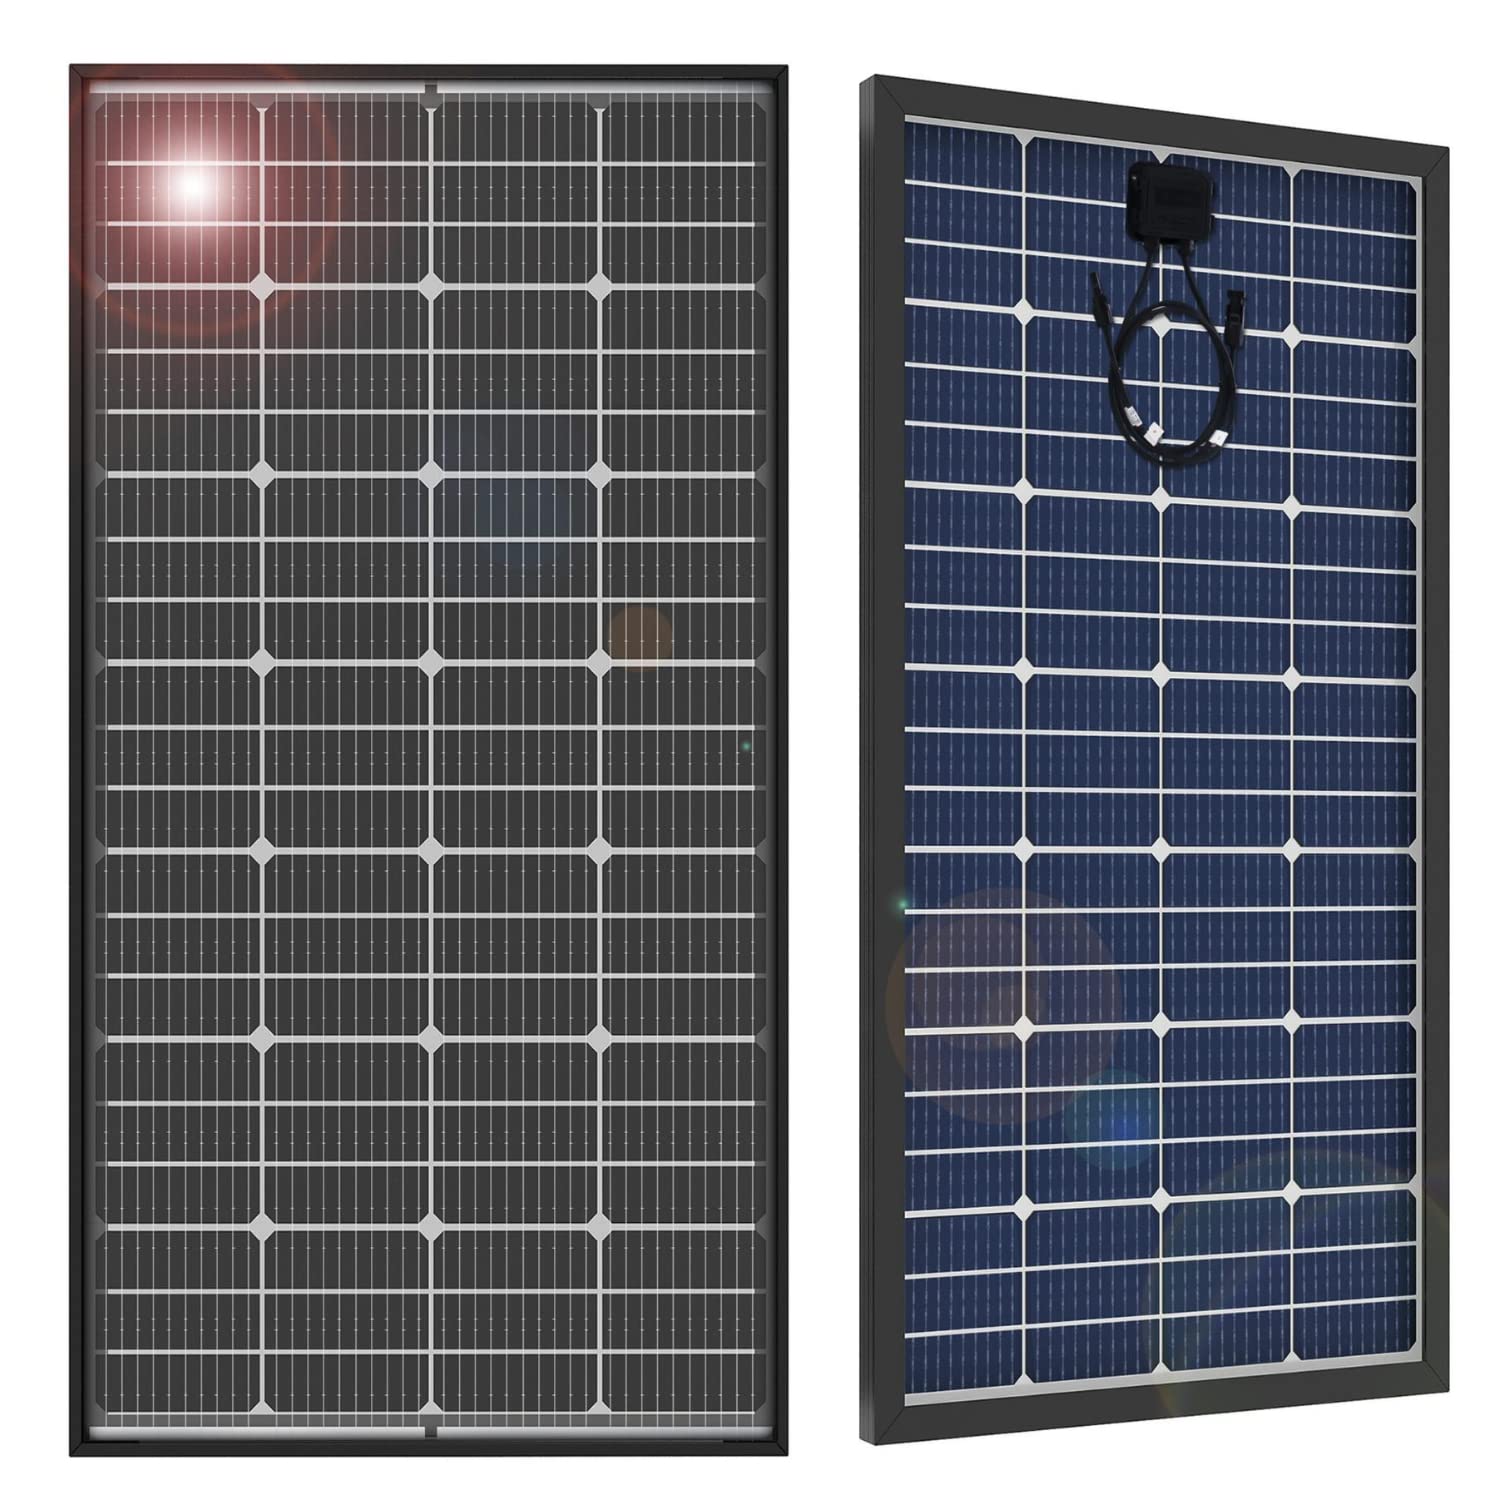 JJN Solar Panel Kit 200w Bifacial Solar Panel with 20A Solar Charge Controller+41" Adjustable Solar Panel Brackets for Homes RV Marine Camping Boat Off Grid System